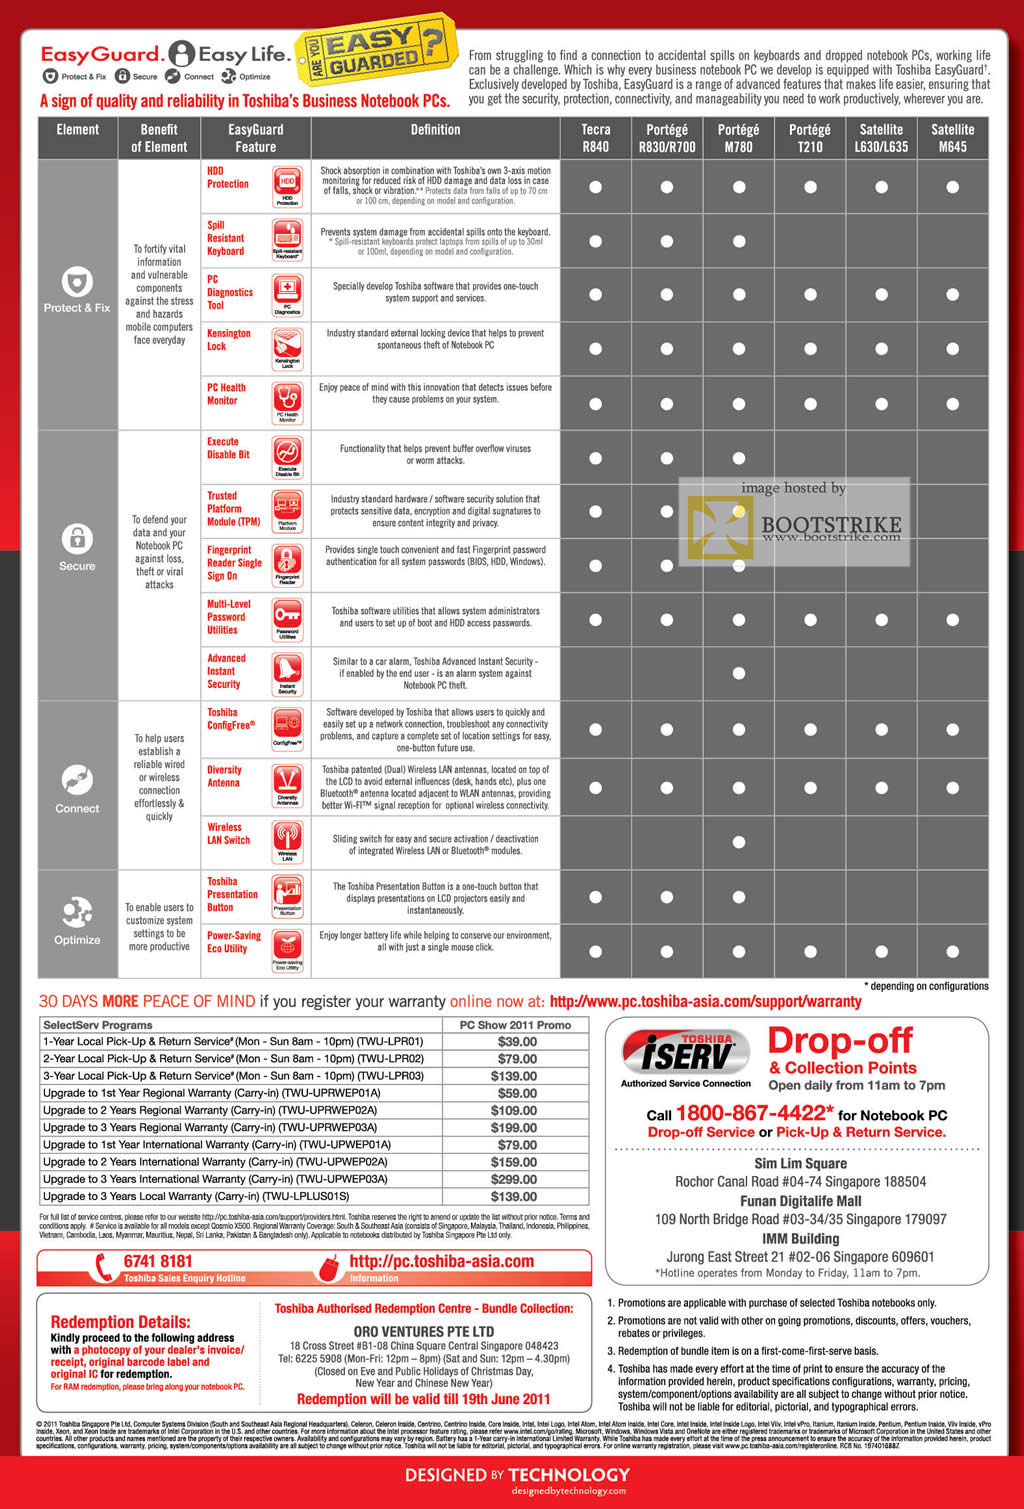 PC Show 2011 price list image brochure of Toshiba Notebooks Business SelectServ Programs Warranty Options Comparison Chart